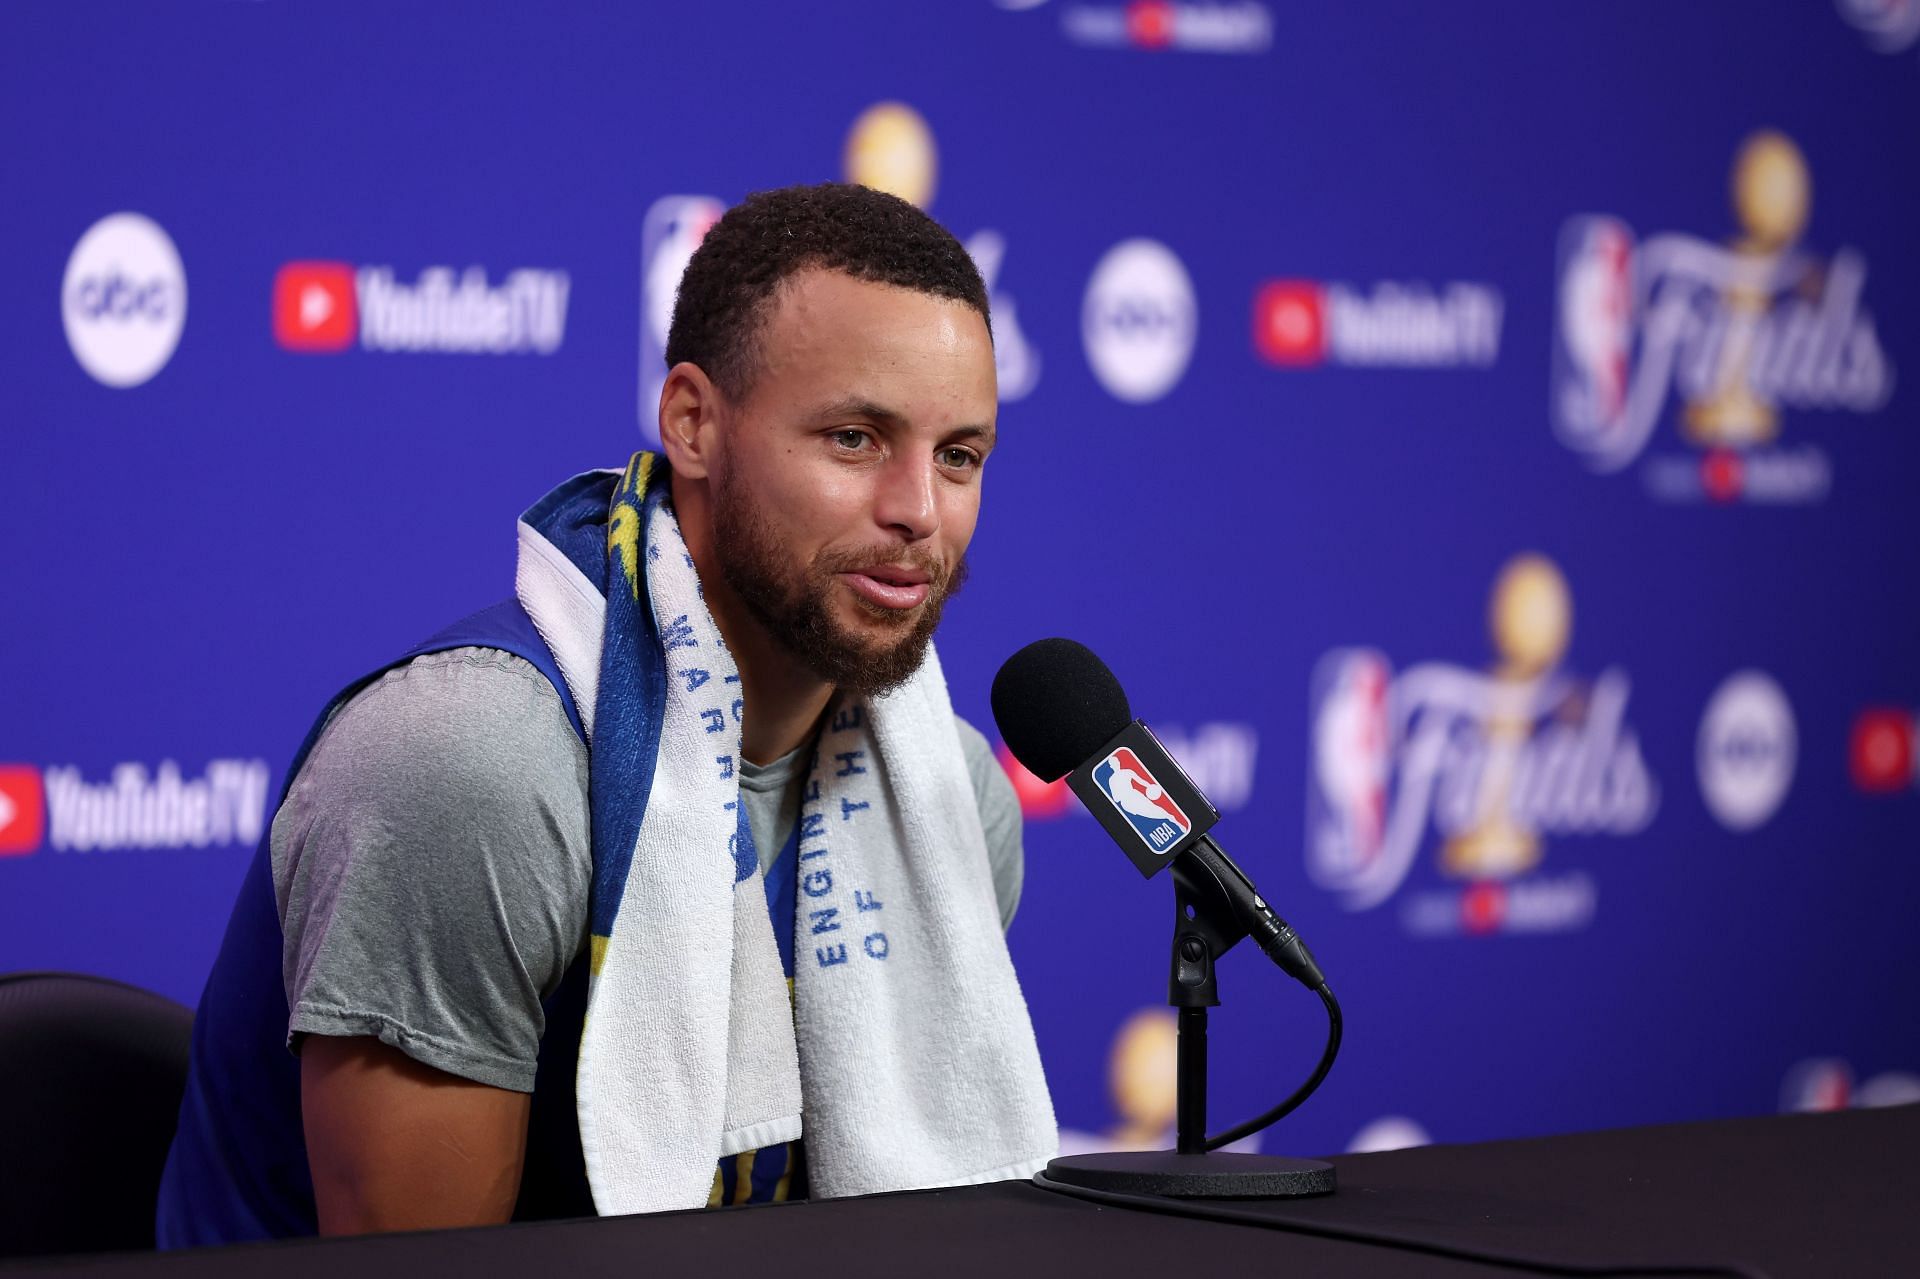 Steph Curry of the Golden State Warriors at the 2022 NBA Finals Media Day.